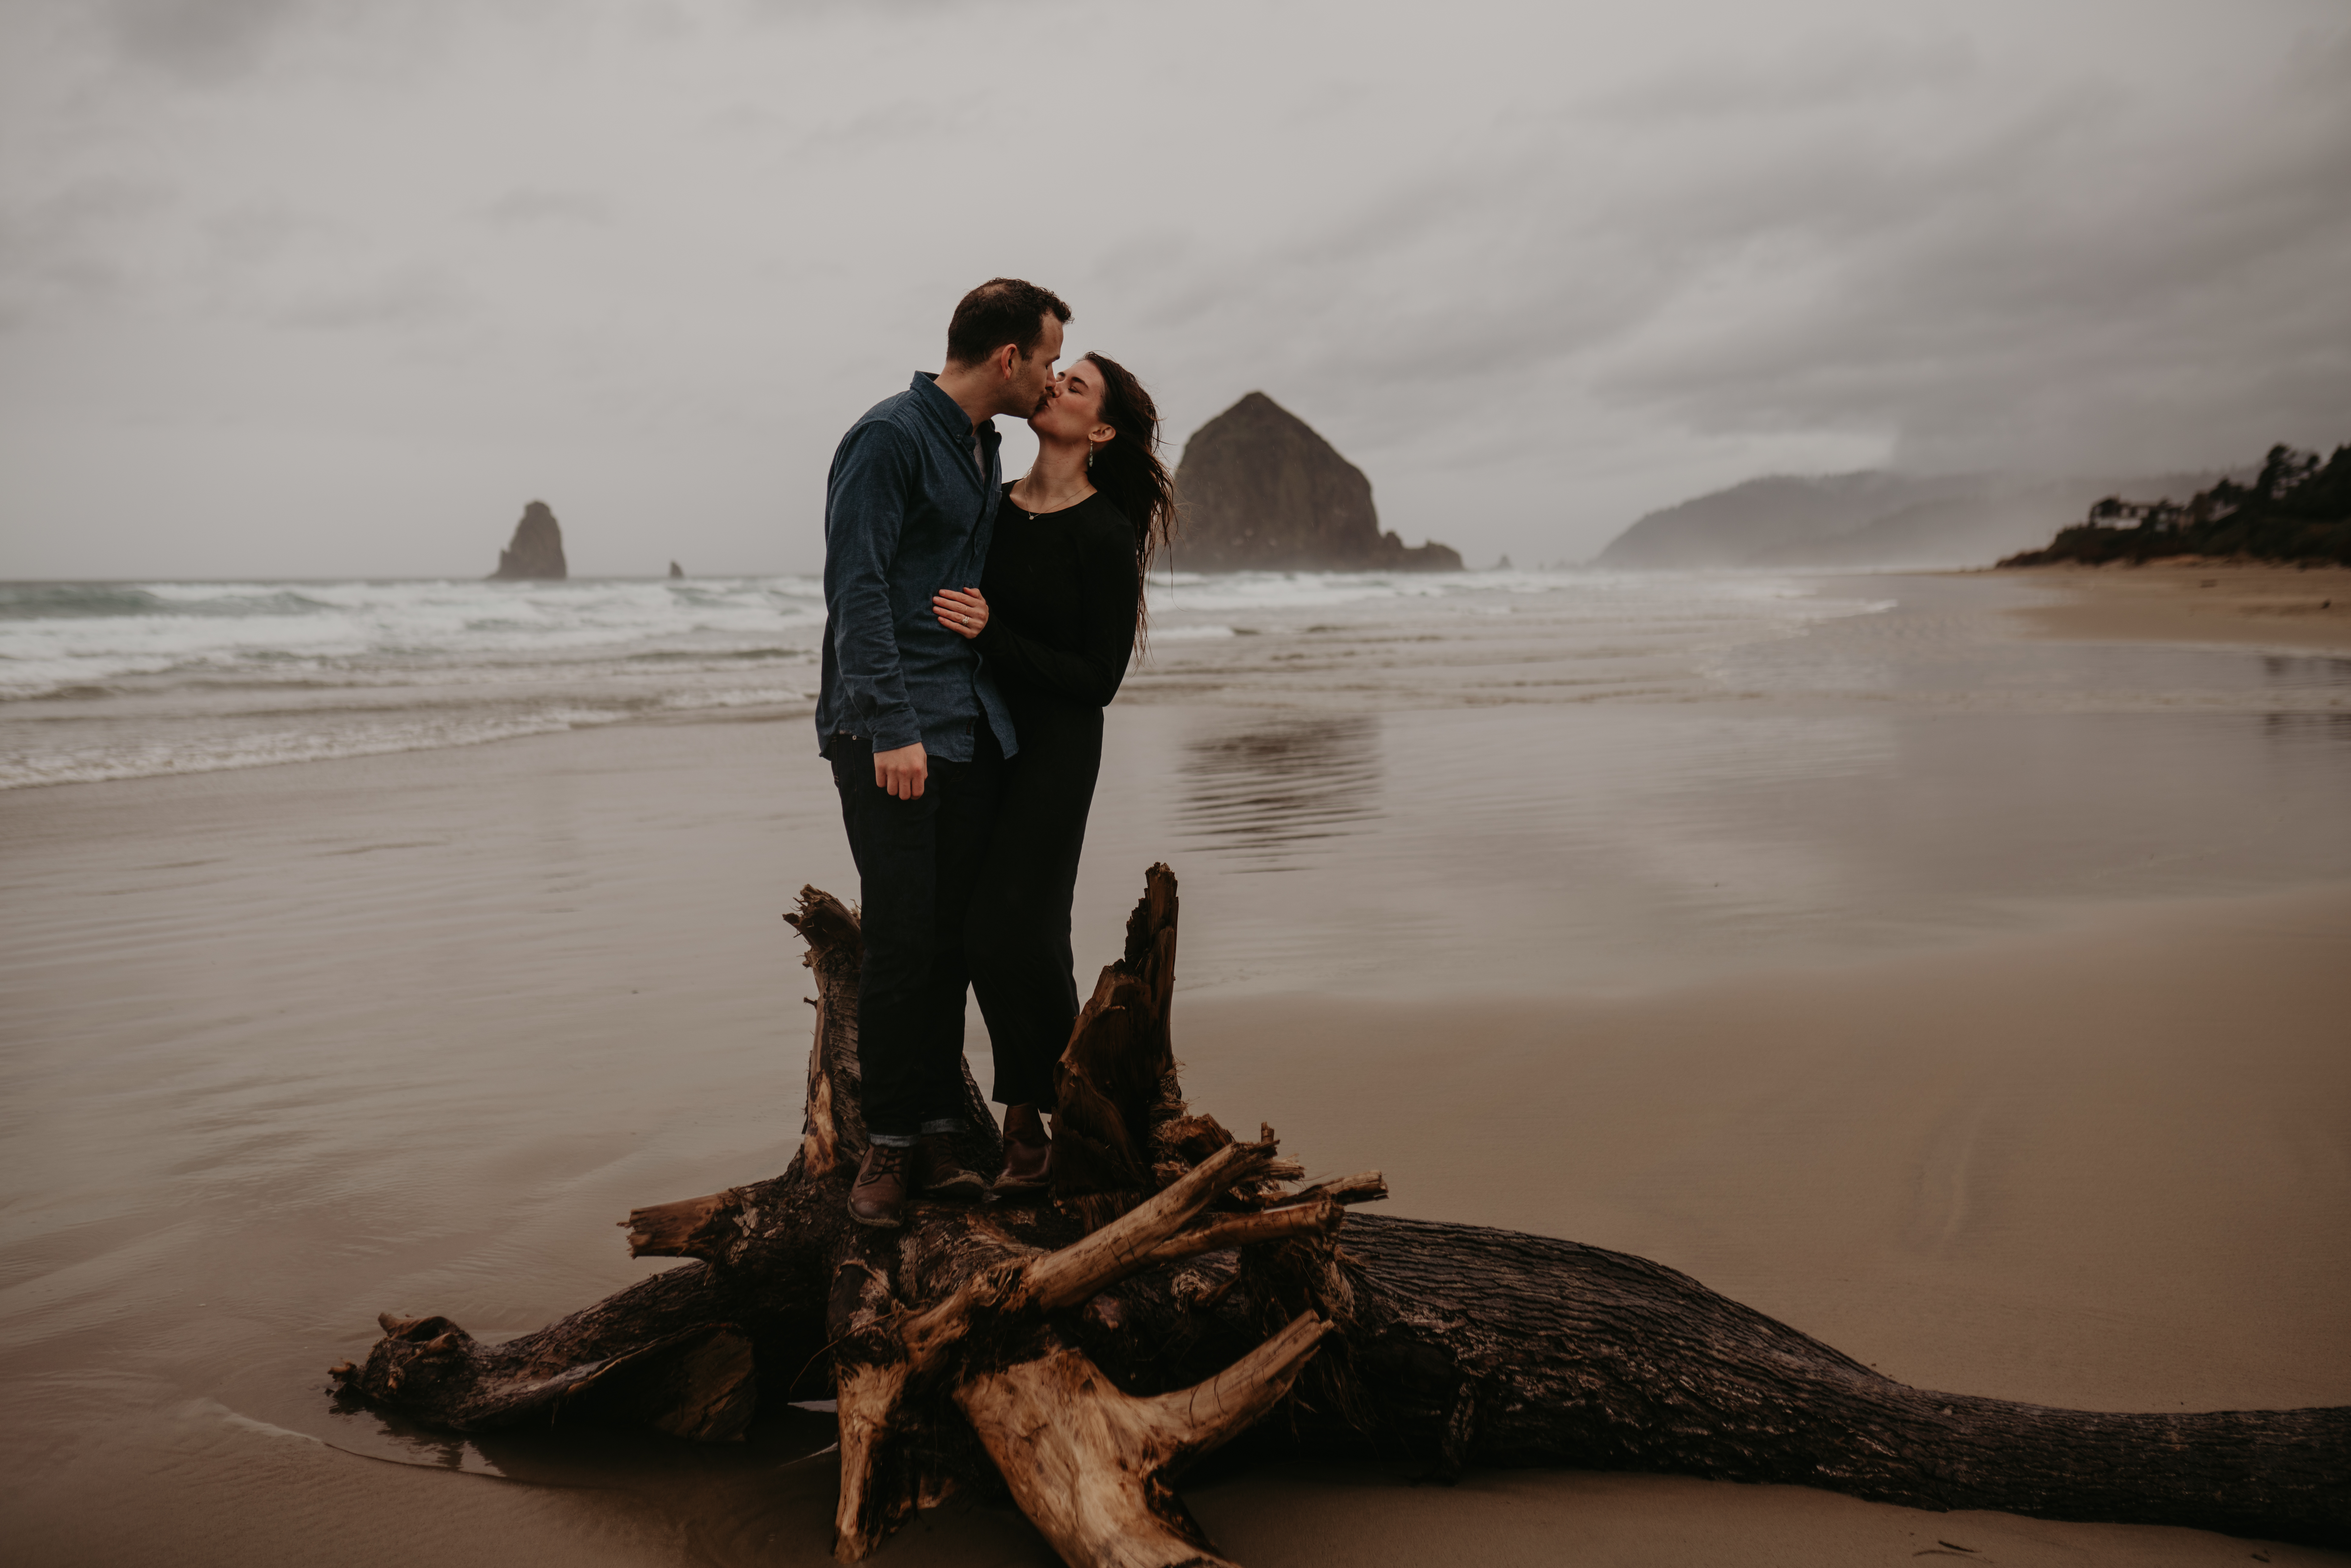 cannon beach oregon engagment session couples photoshoot pdx pnw hug point wedding photography photographer ocean haystack rock dallas dfw texas anniversary session moody rainy day raining cloudy